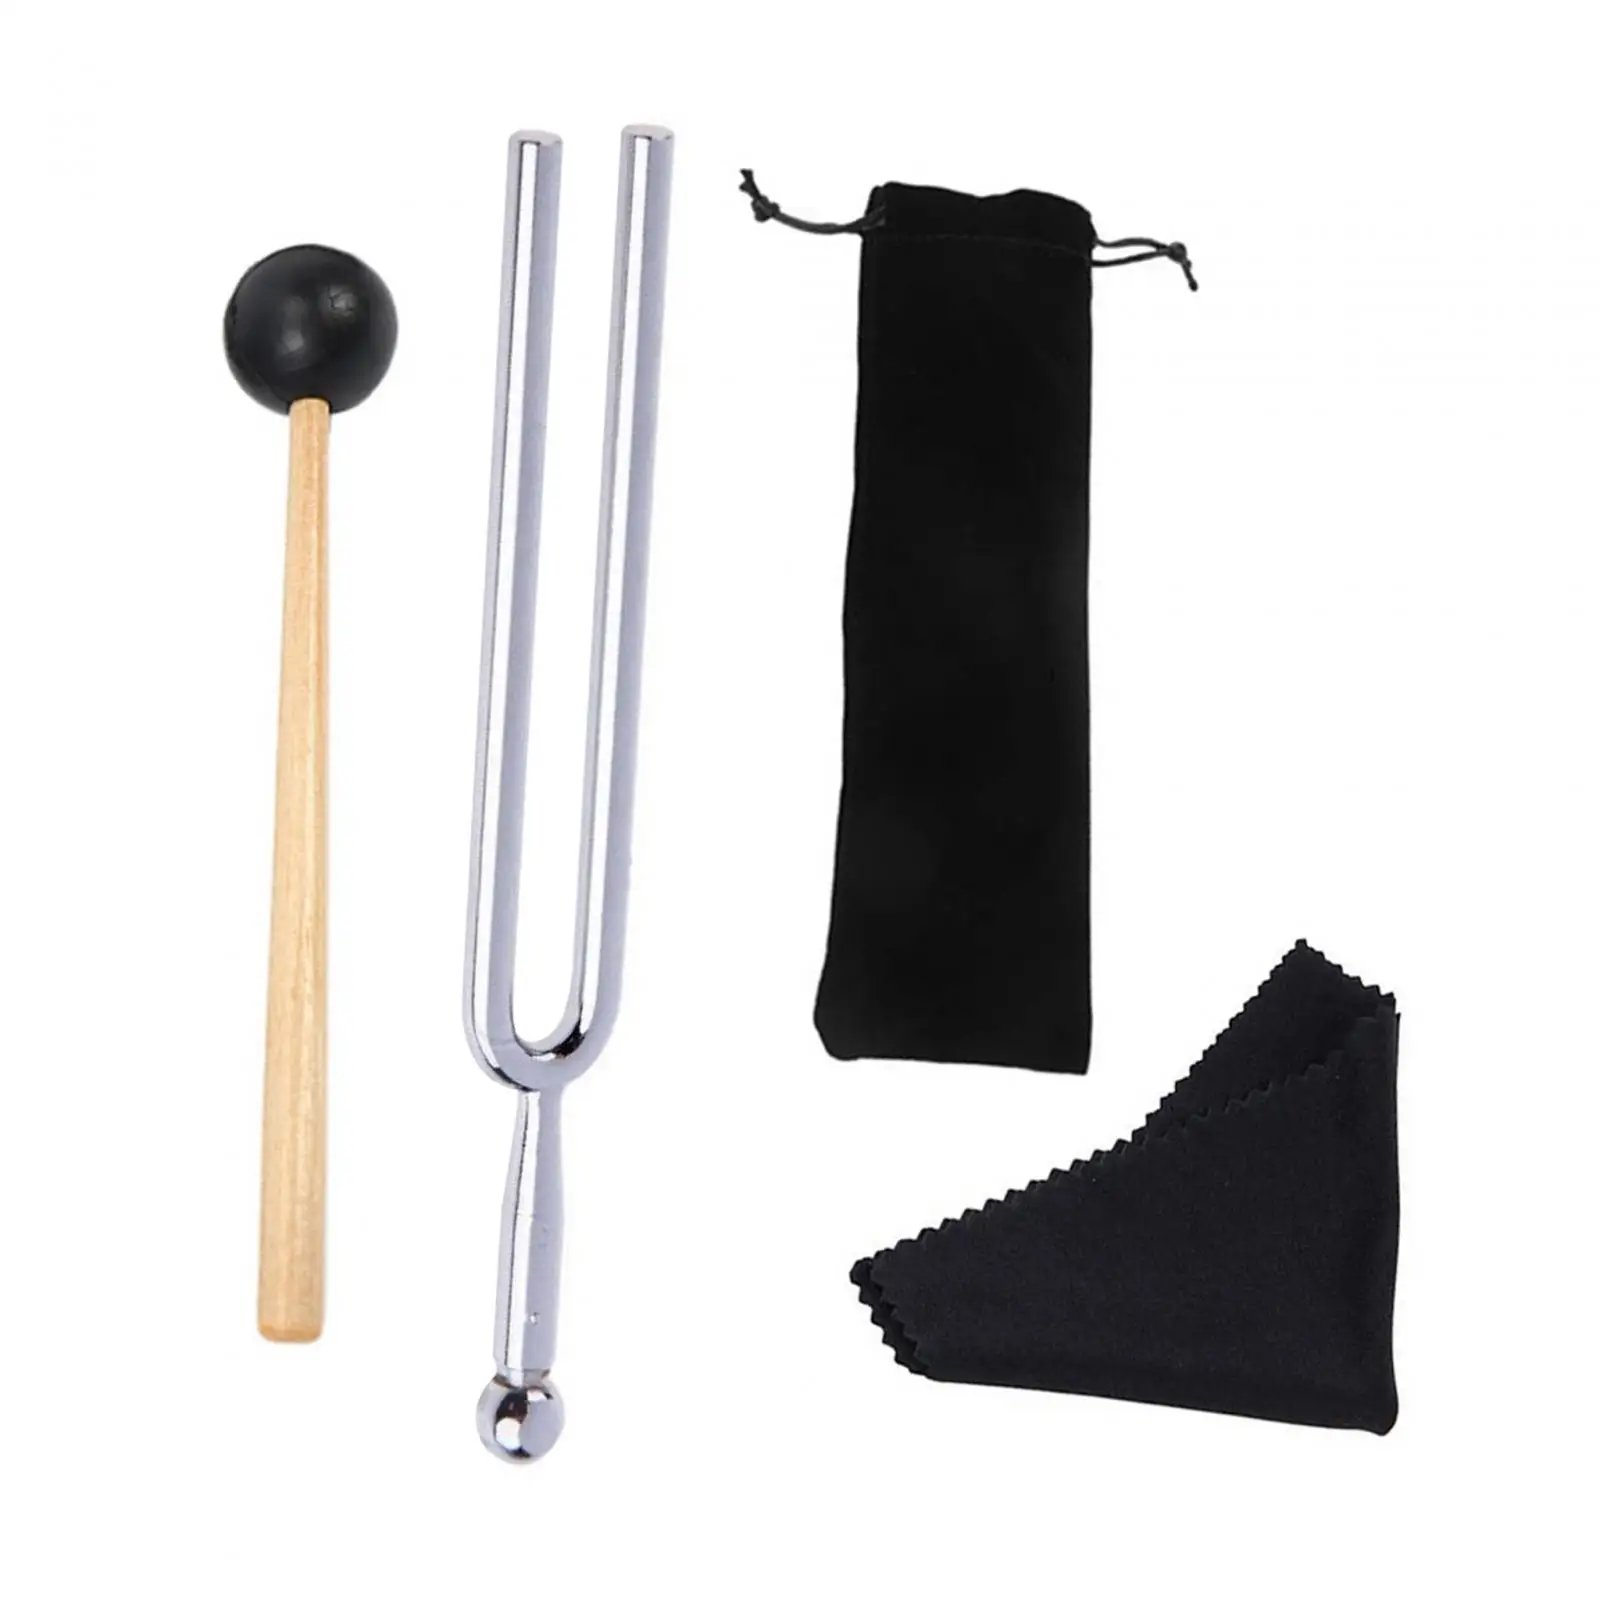 A 440 Tuning Fork Practical Comfortable with Silicone Mallet for Basic Education Singing Practice Ear Trainng Balancing